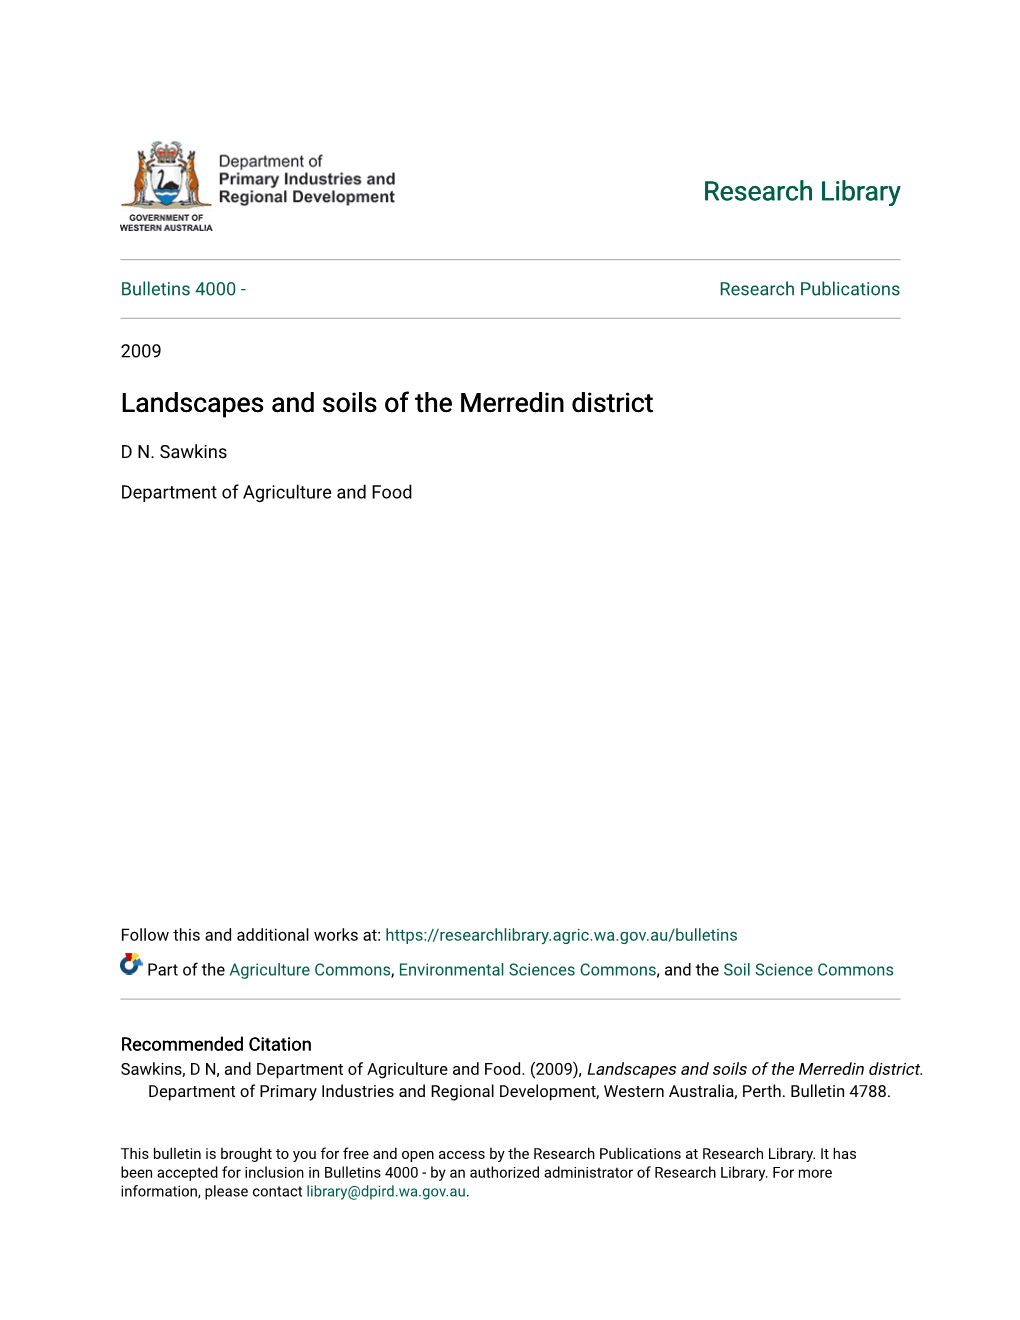 Landscapes and Soils of the Merredin District